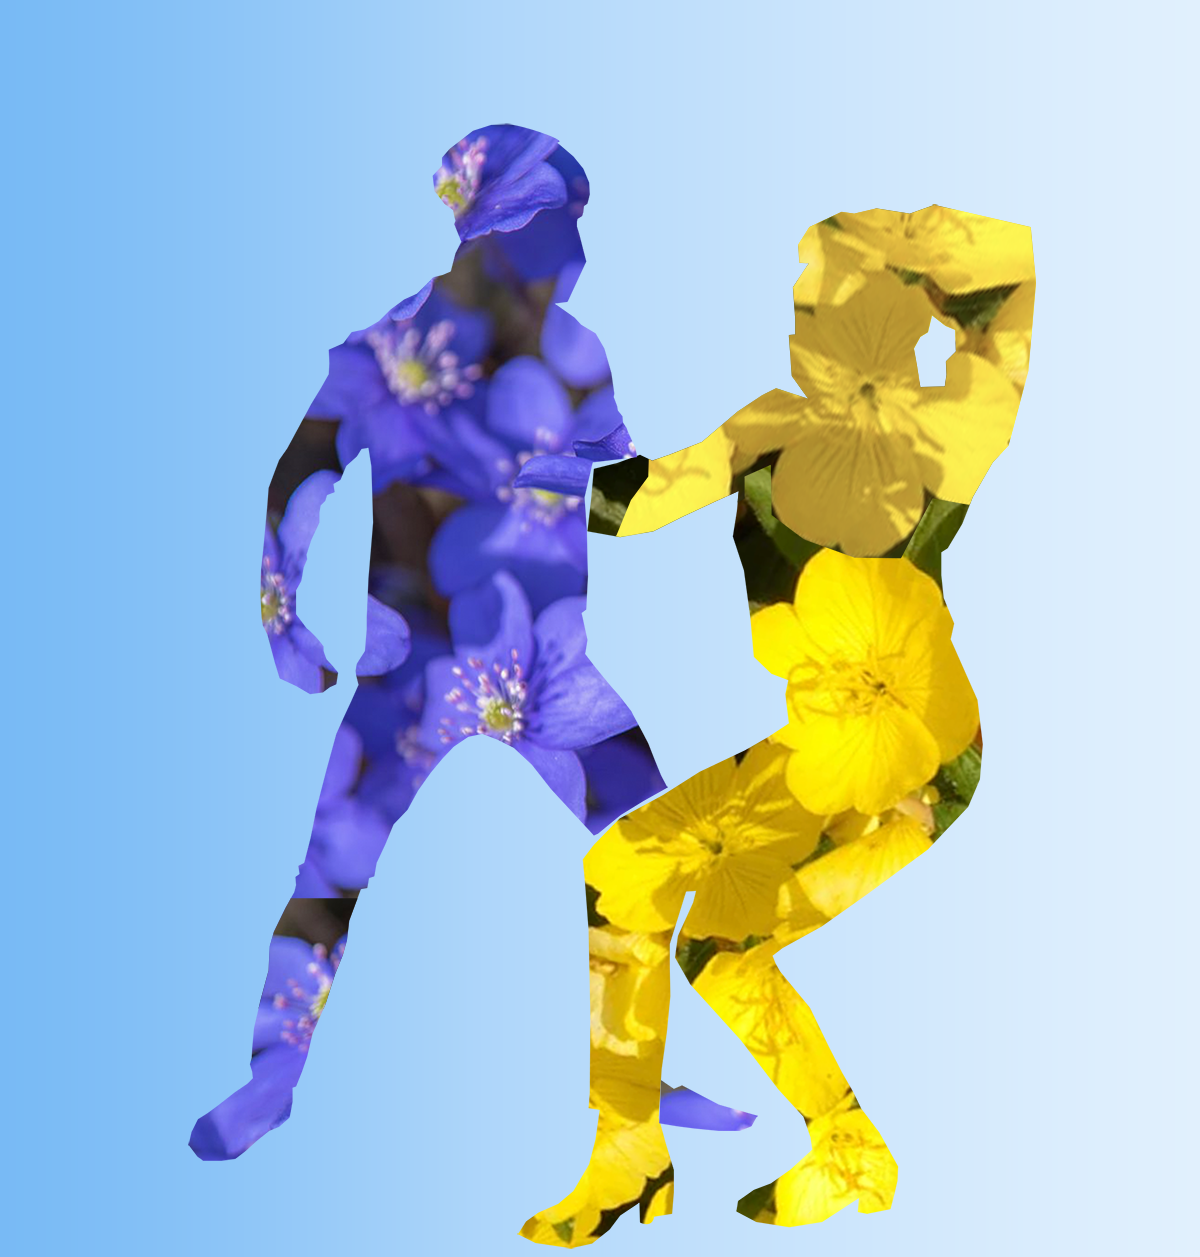 Silhouette of dancers on a blue background. Leader is filled with purple flowers, follow is filled with yellow flowers.